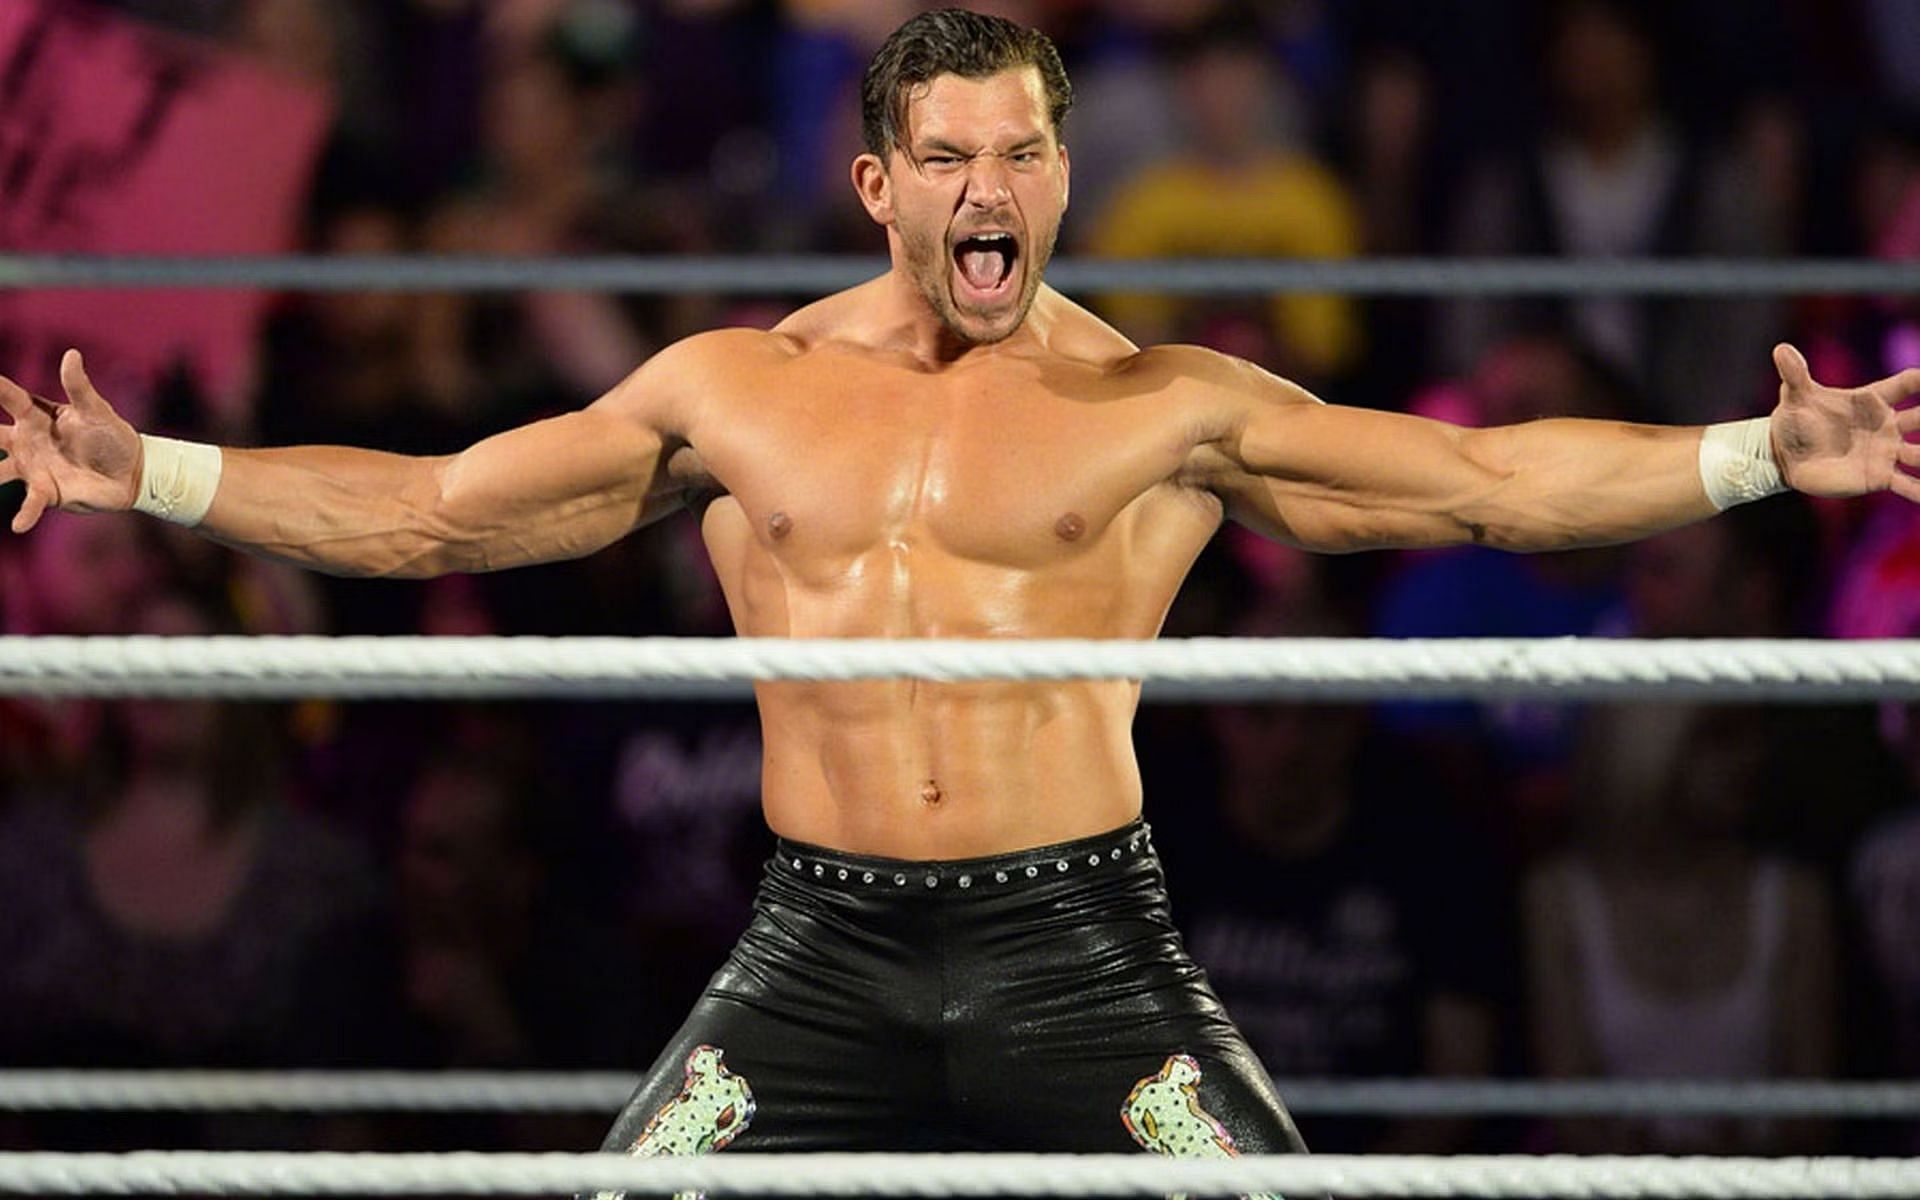 Fandango was extremely over after defeating Chris Jericho at WrestleMania!